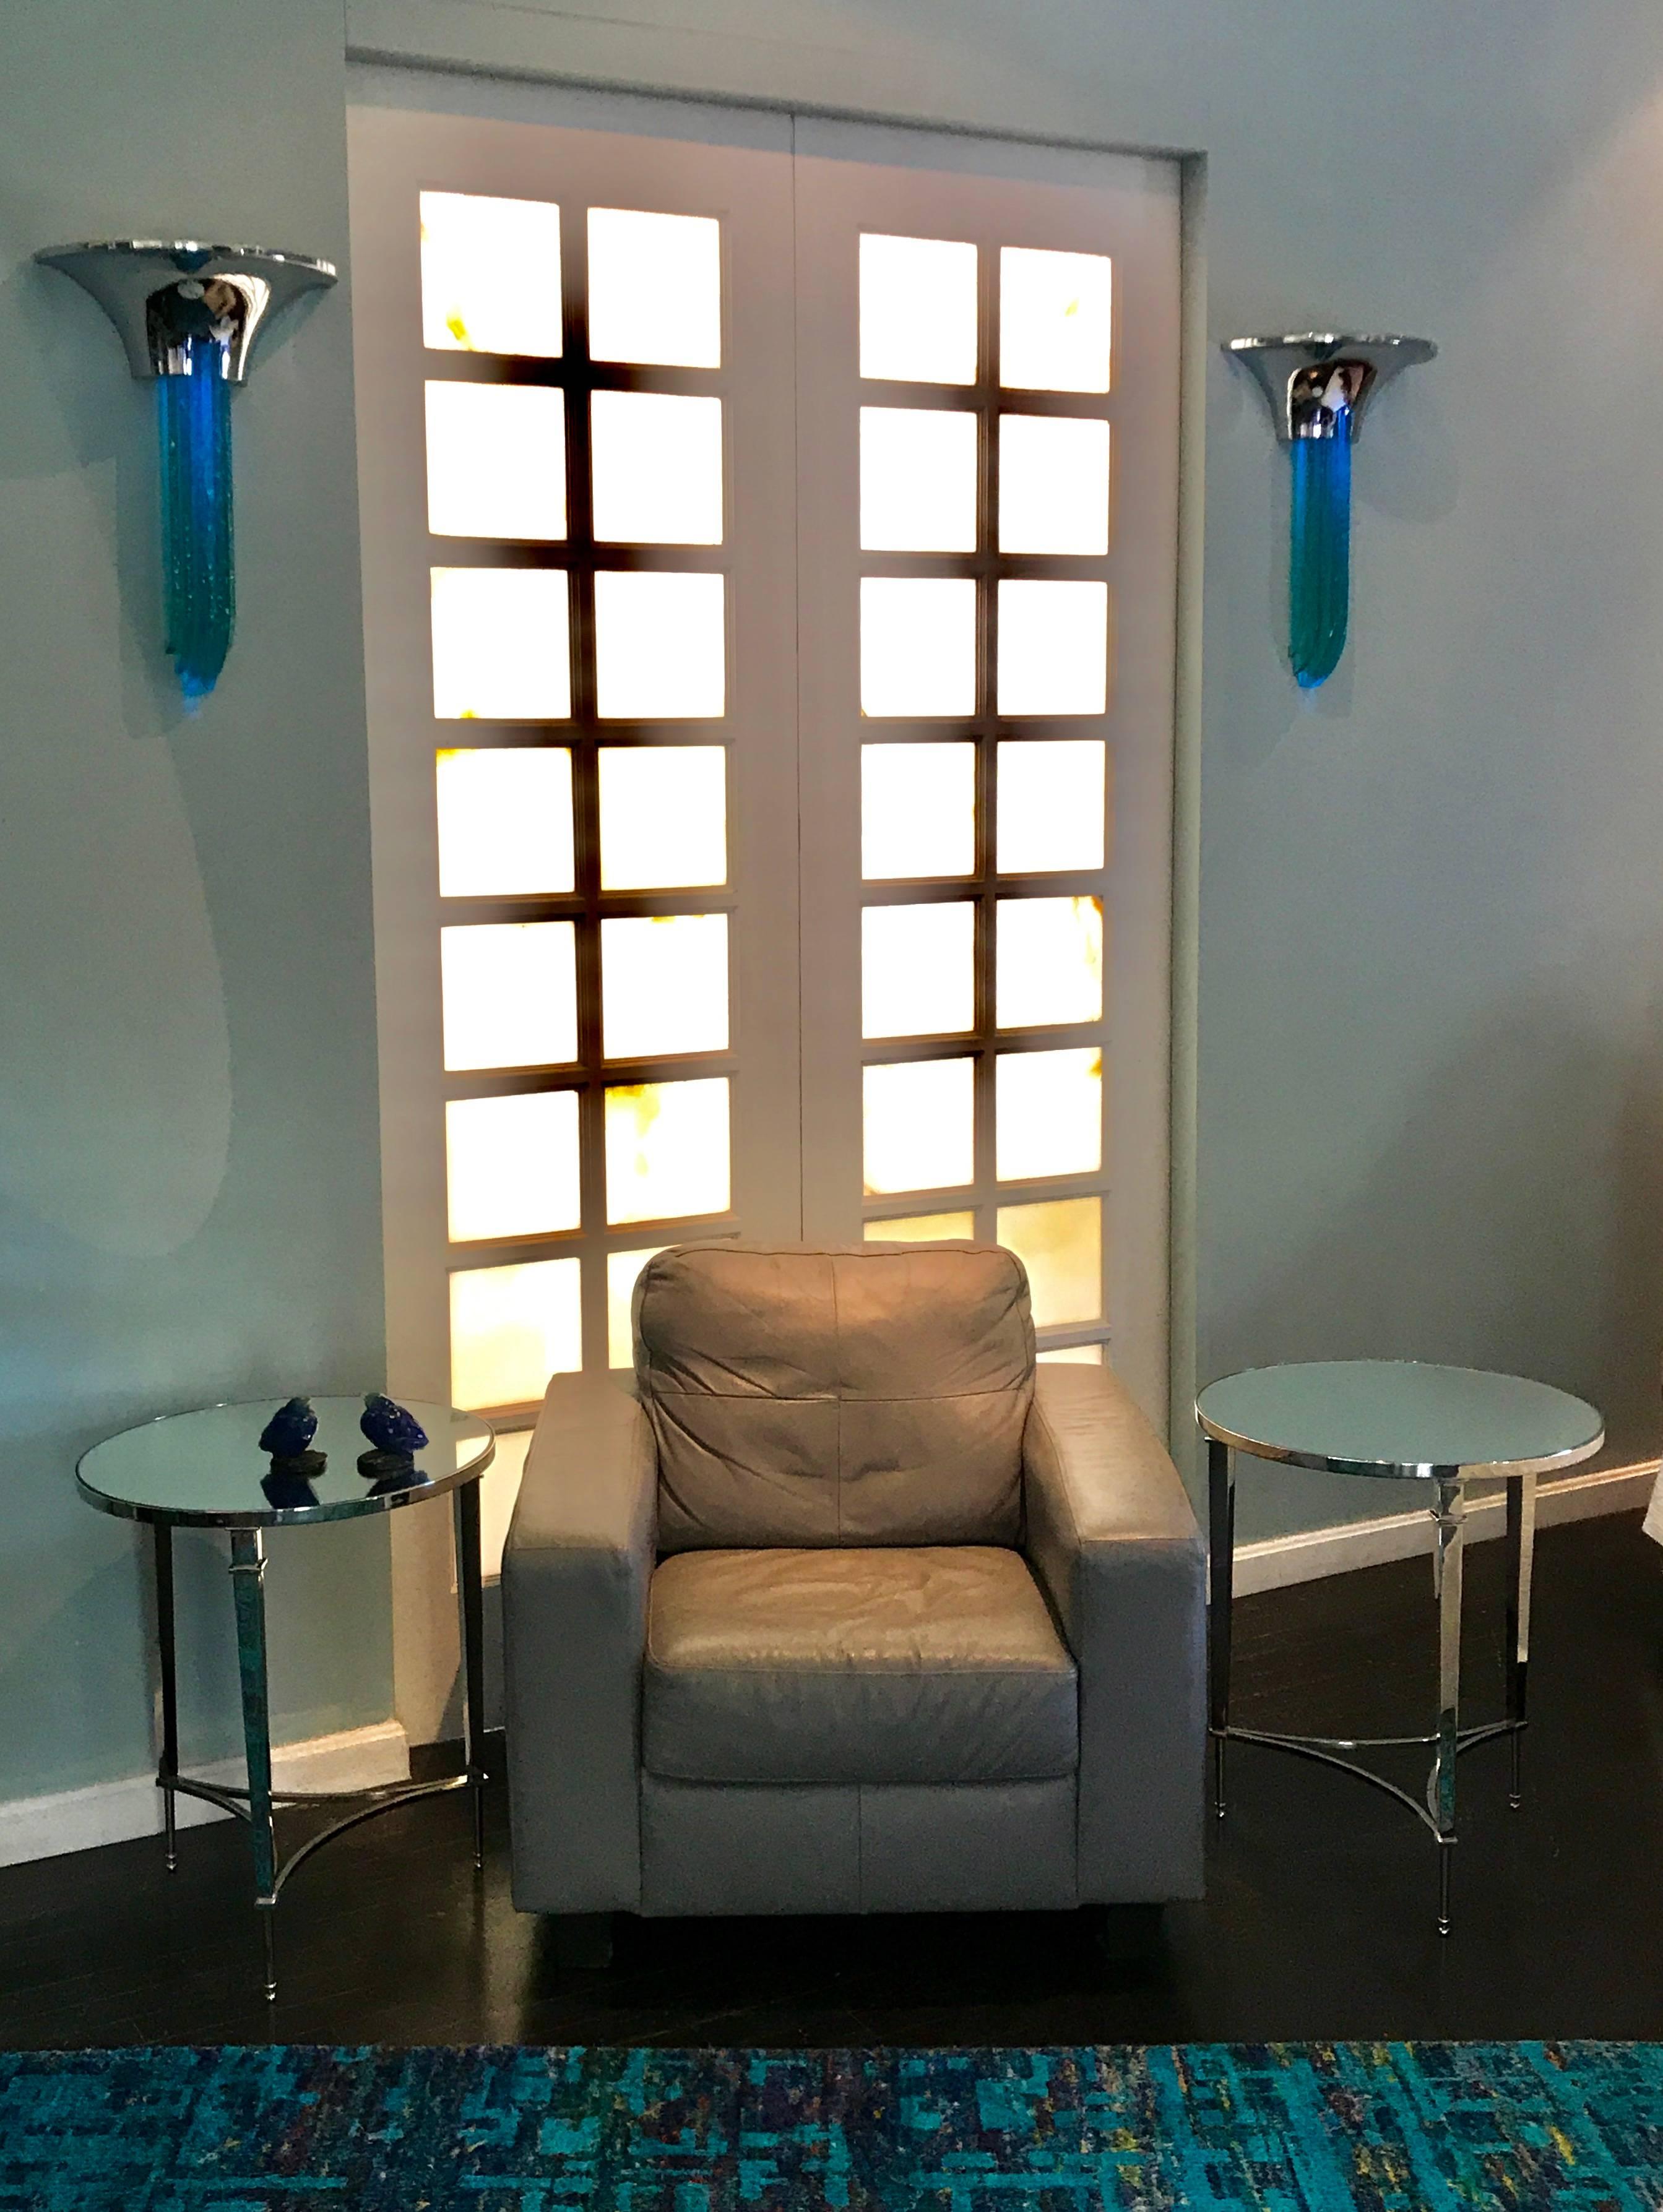 A stunning and rare Pair of "Purcell" Chrome Wall Sconces designed by Karl Springer. This form comes in a few color and material variations.
The Crome and Teal Glass being one of the rarest ones to find. Lit up they look like icycles.
The